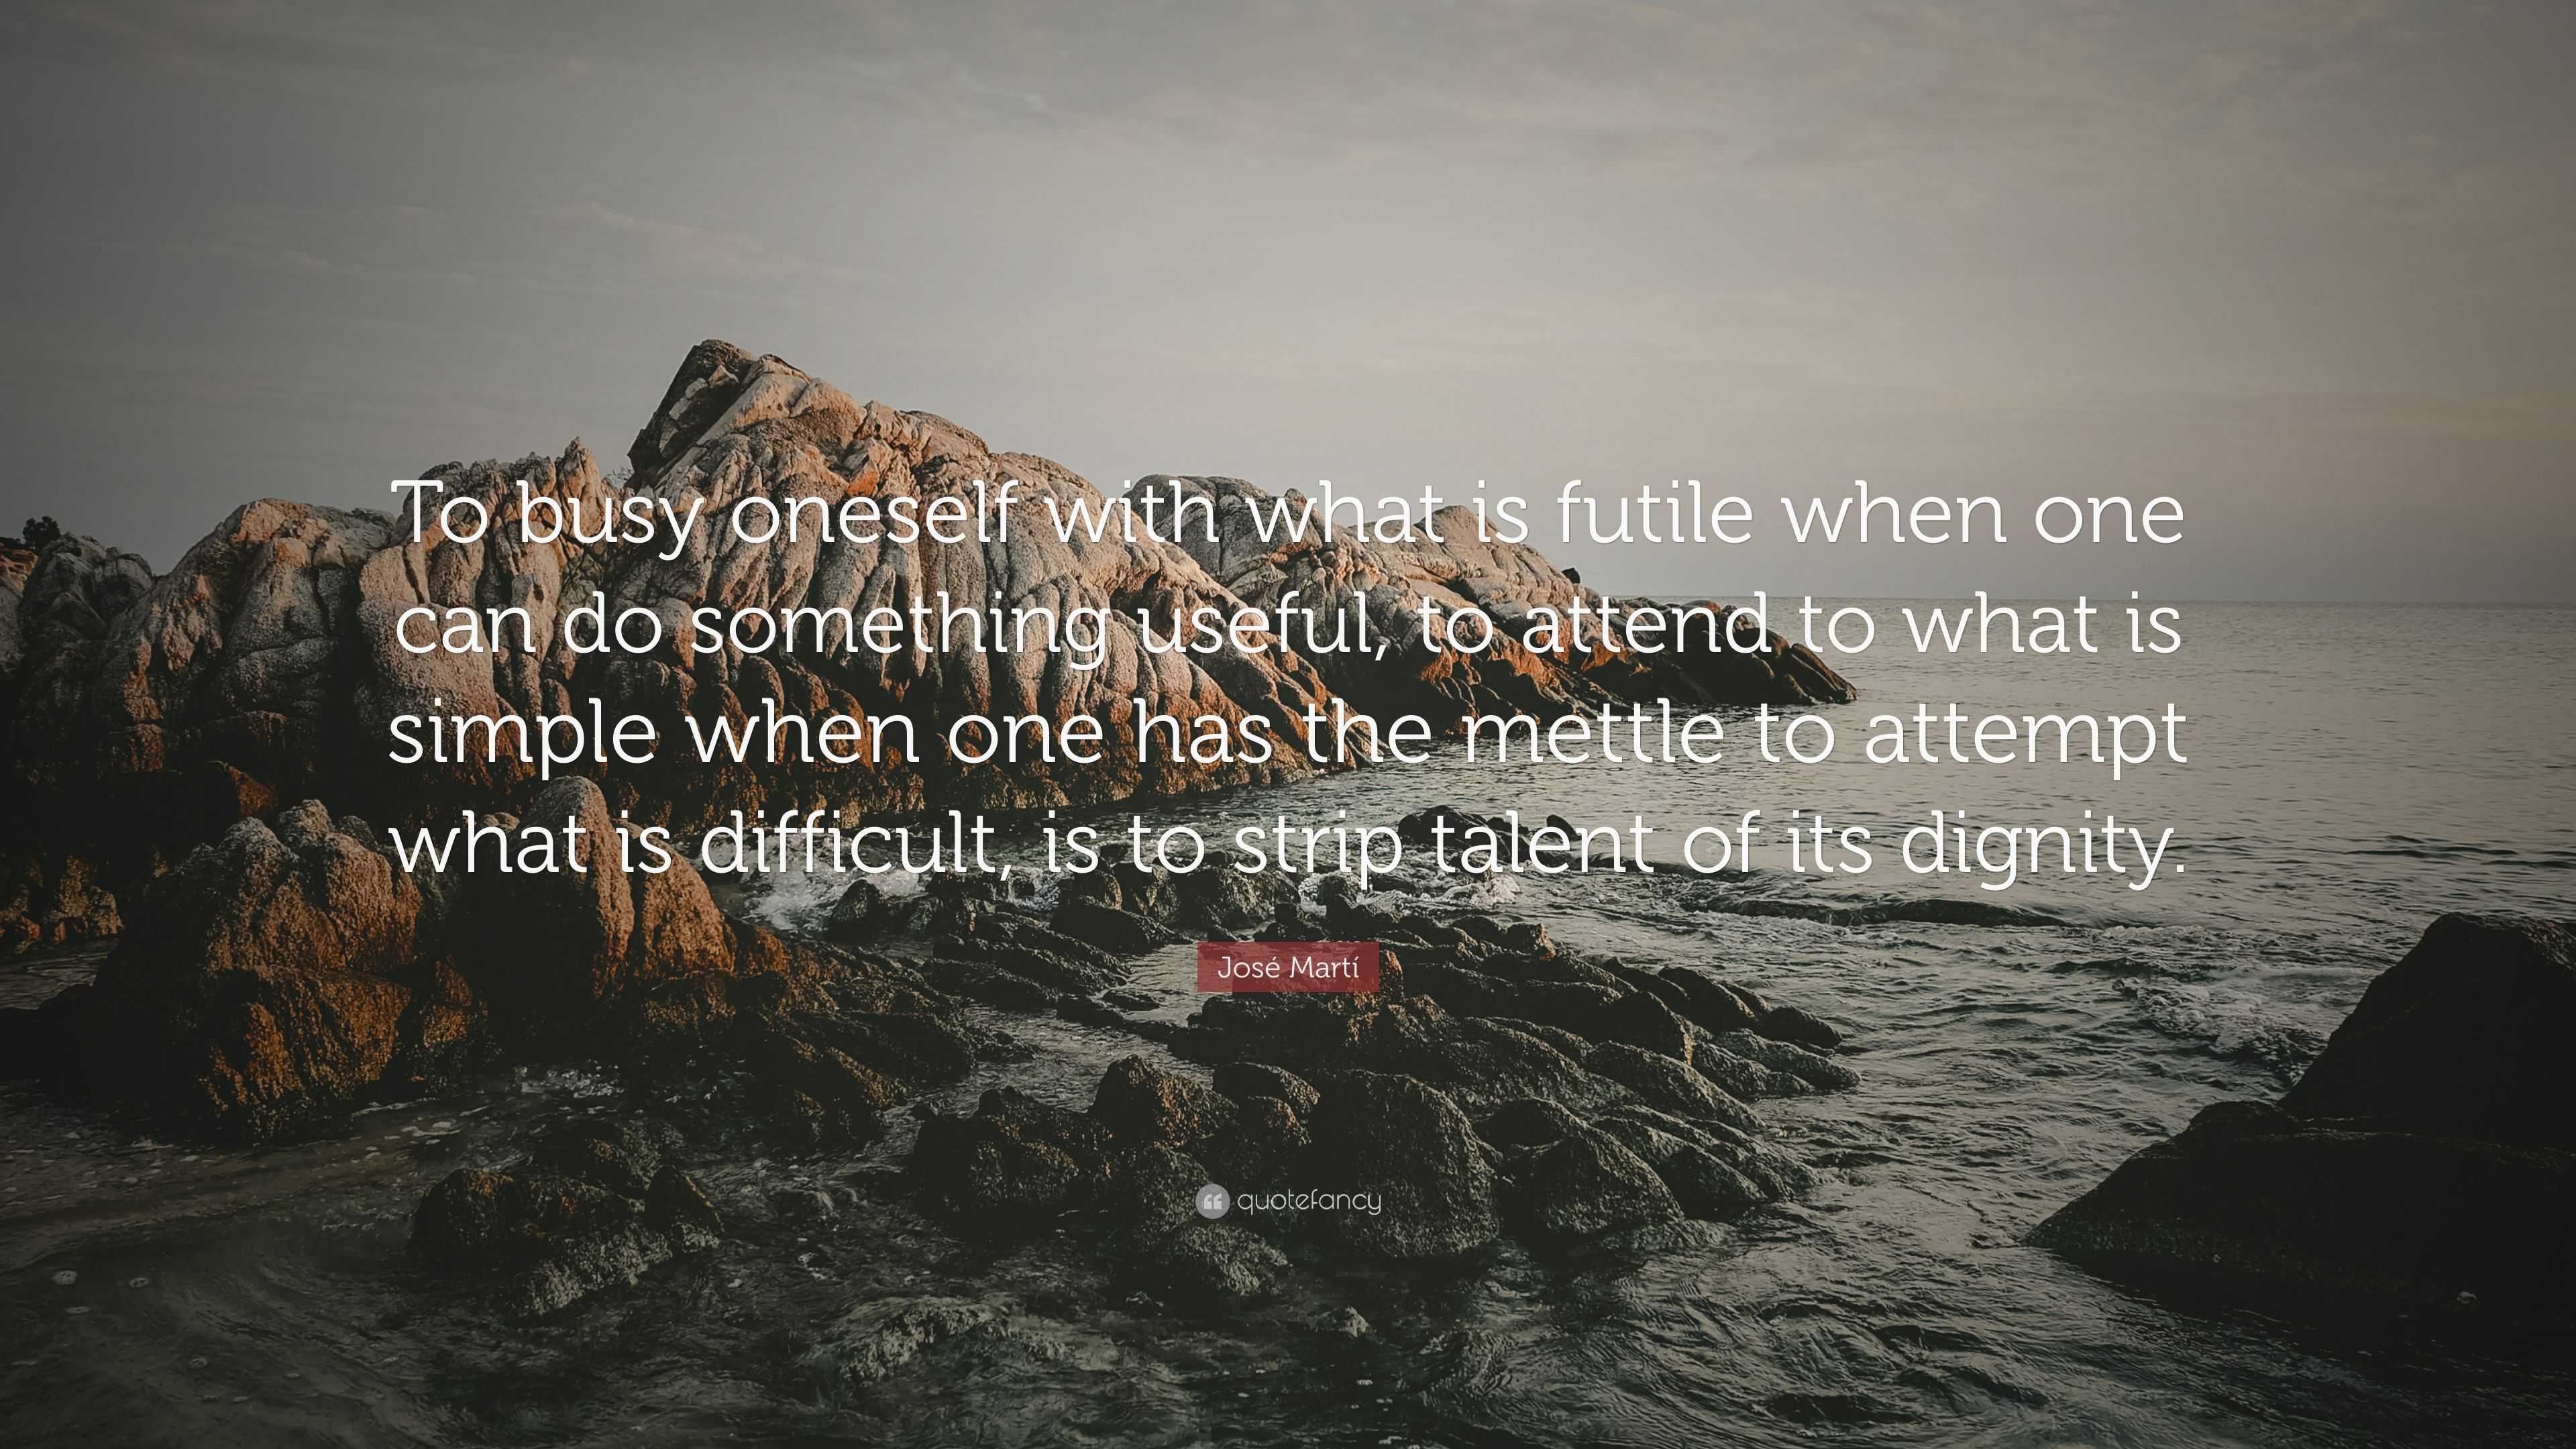 José Martí Quote: “To busy oneself with what is futile when one can do ...